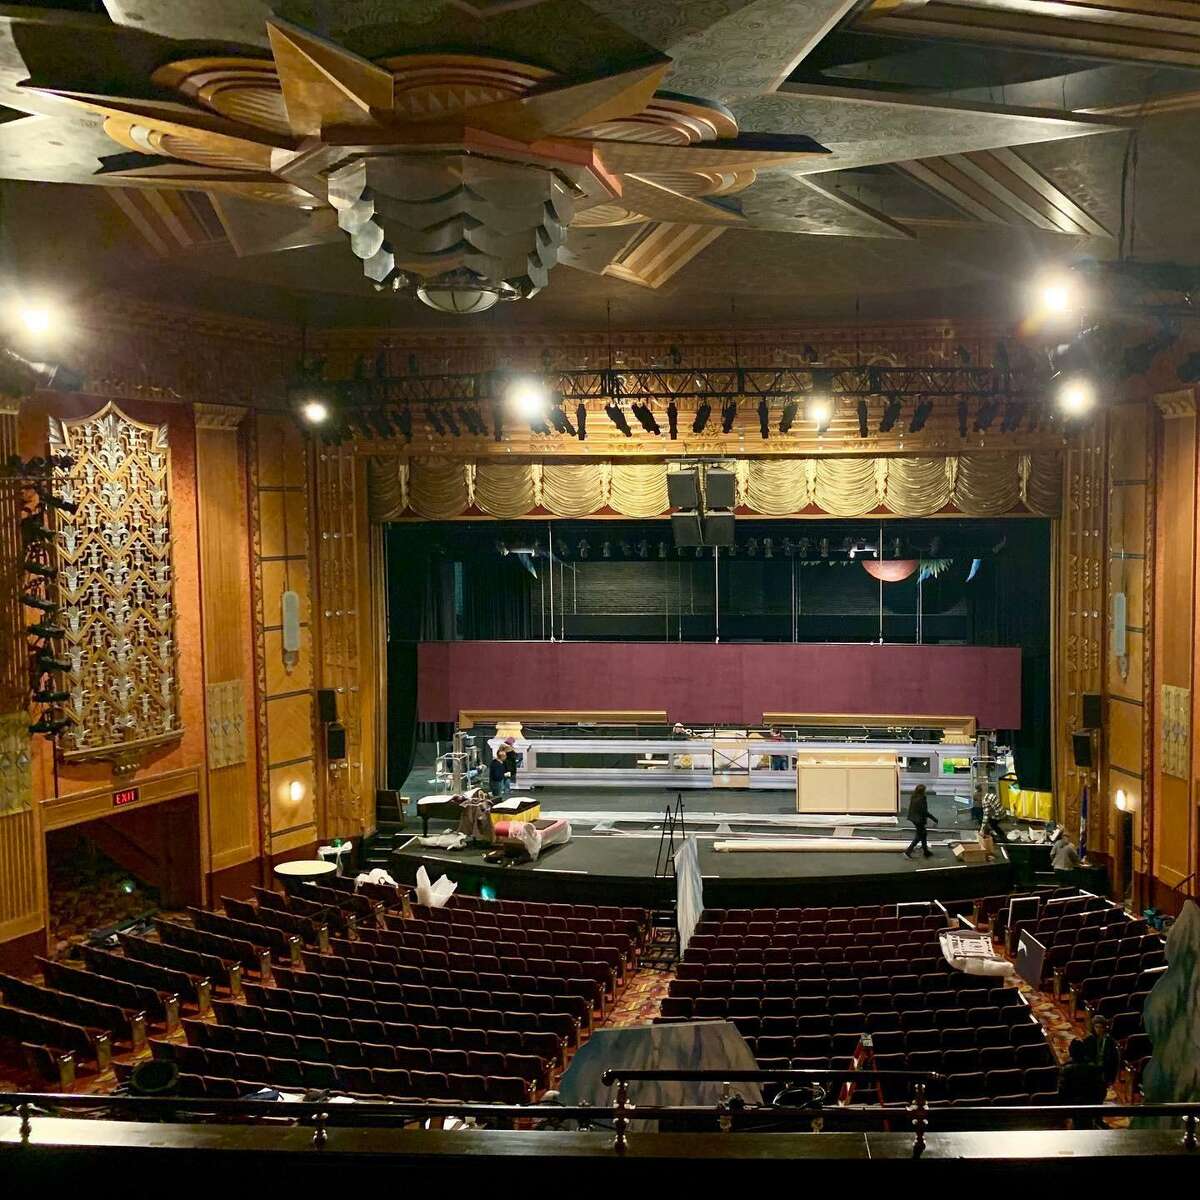 Torrington’s Warner Theatre sends fundraising appeal, waits to reopen